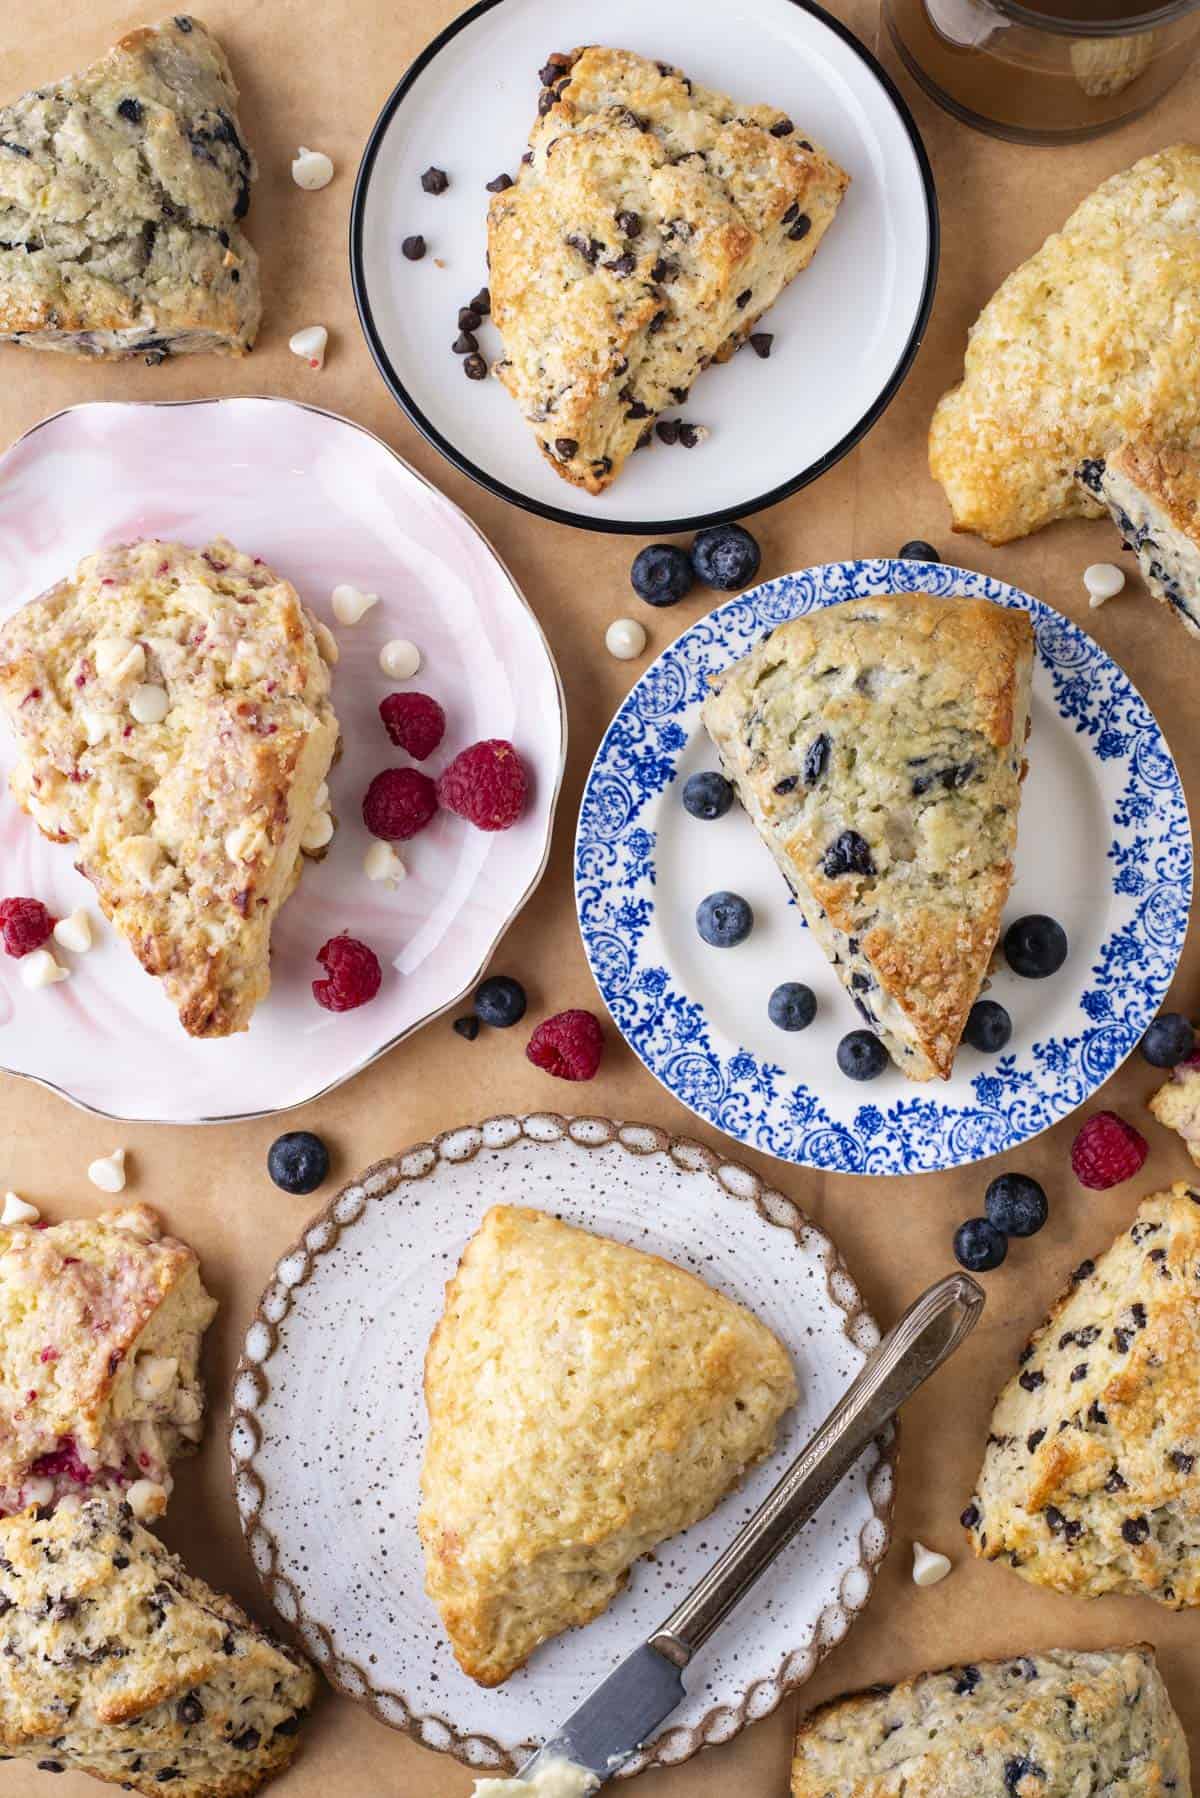 an arrangement of different flavored scones on colored plates including a raspberry scone on a pink plate, a blueberry scone on a blue plate, a chocolate chip scone on a white and black plate and a plain scone on a speckled plate, with fresh blueberries and raspberries and mini white chocolate chips scattered around